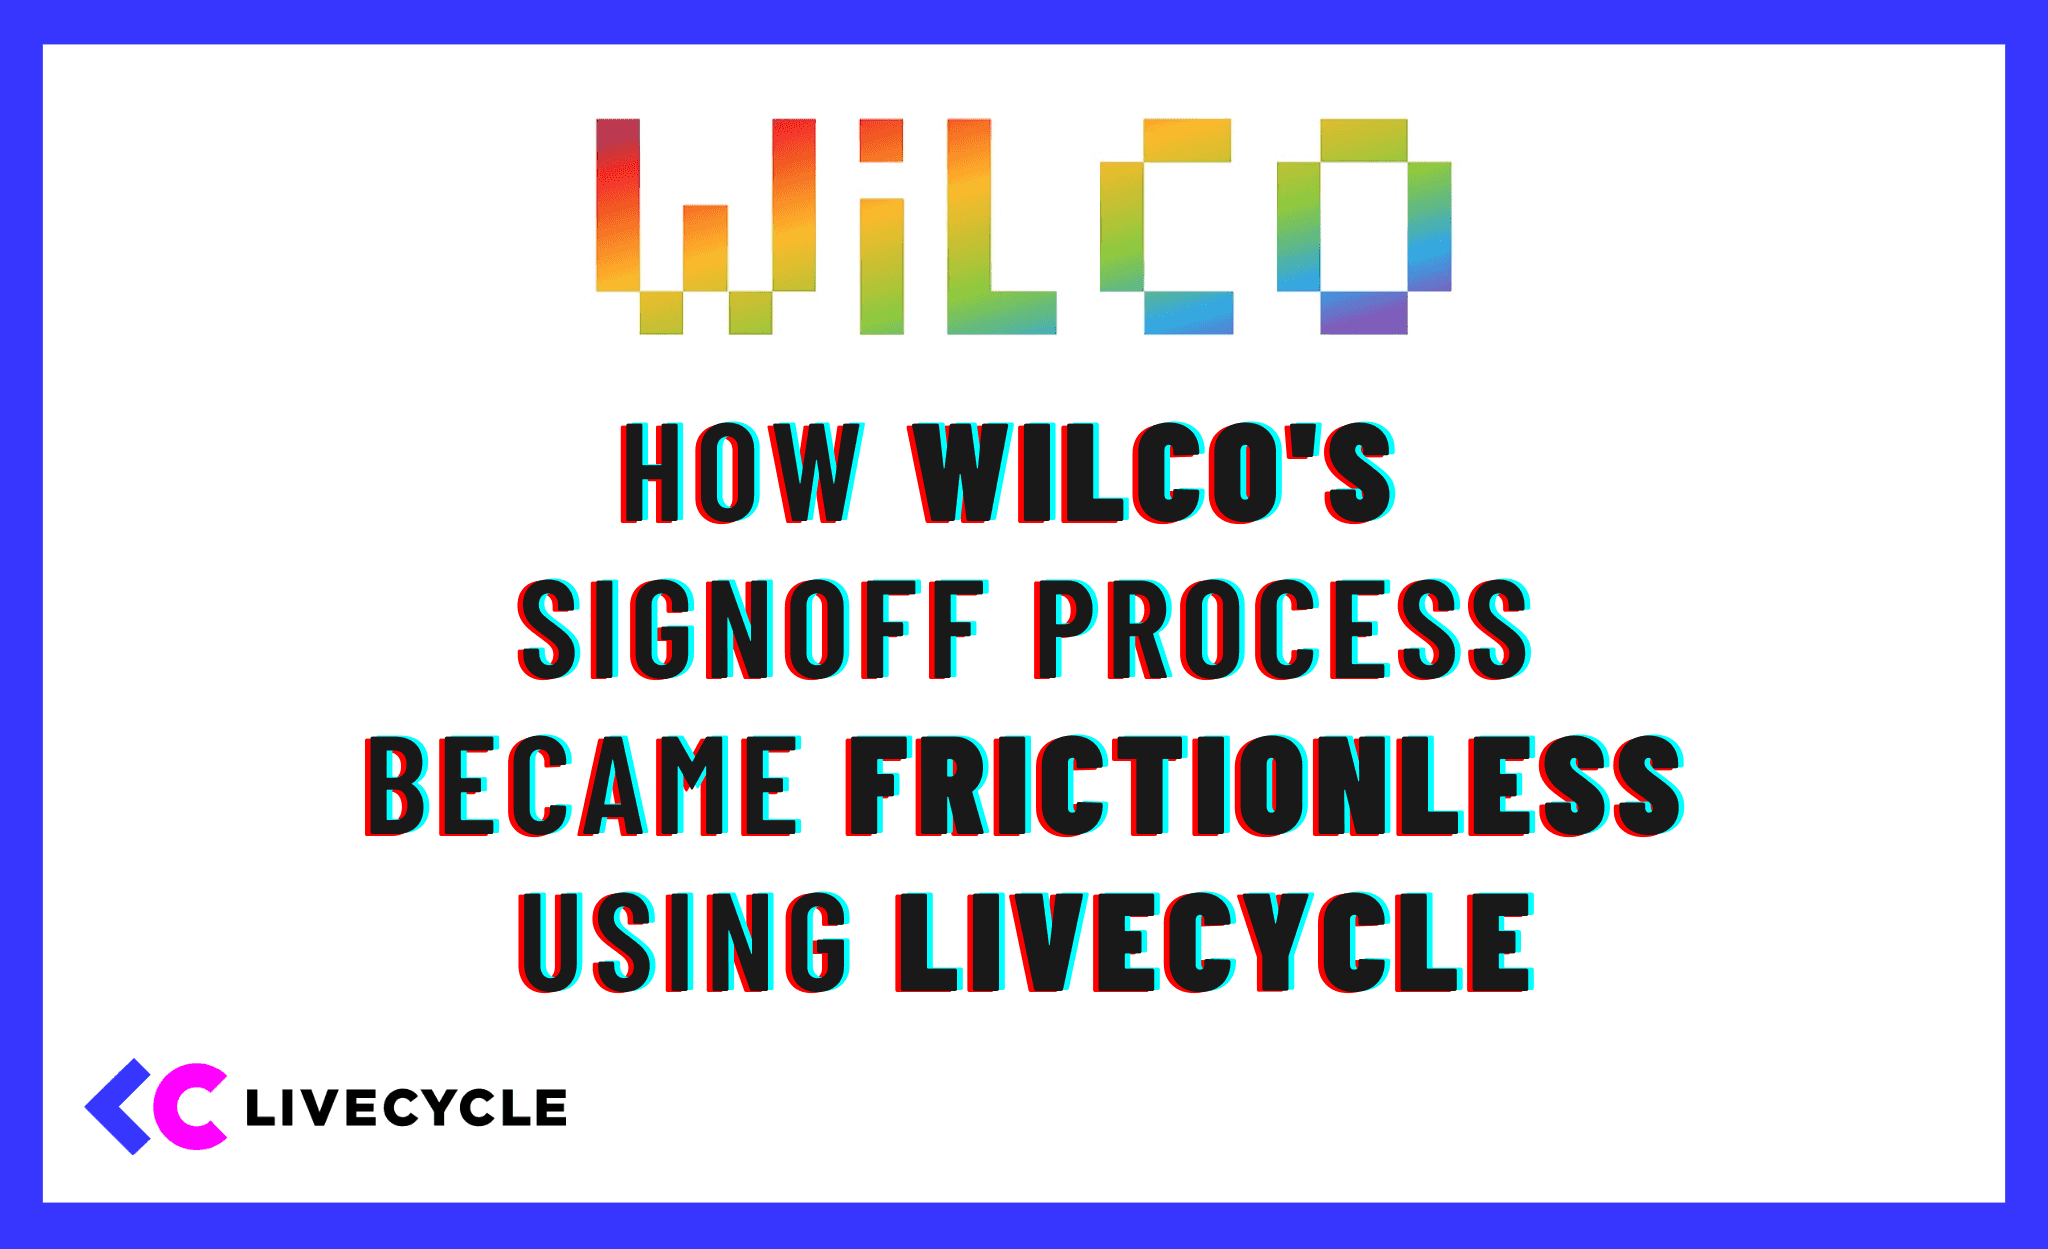 How Wilco's cross-functional signoff process became frictionless using Livecycle